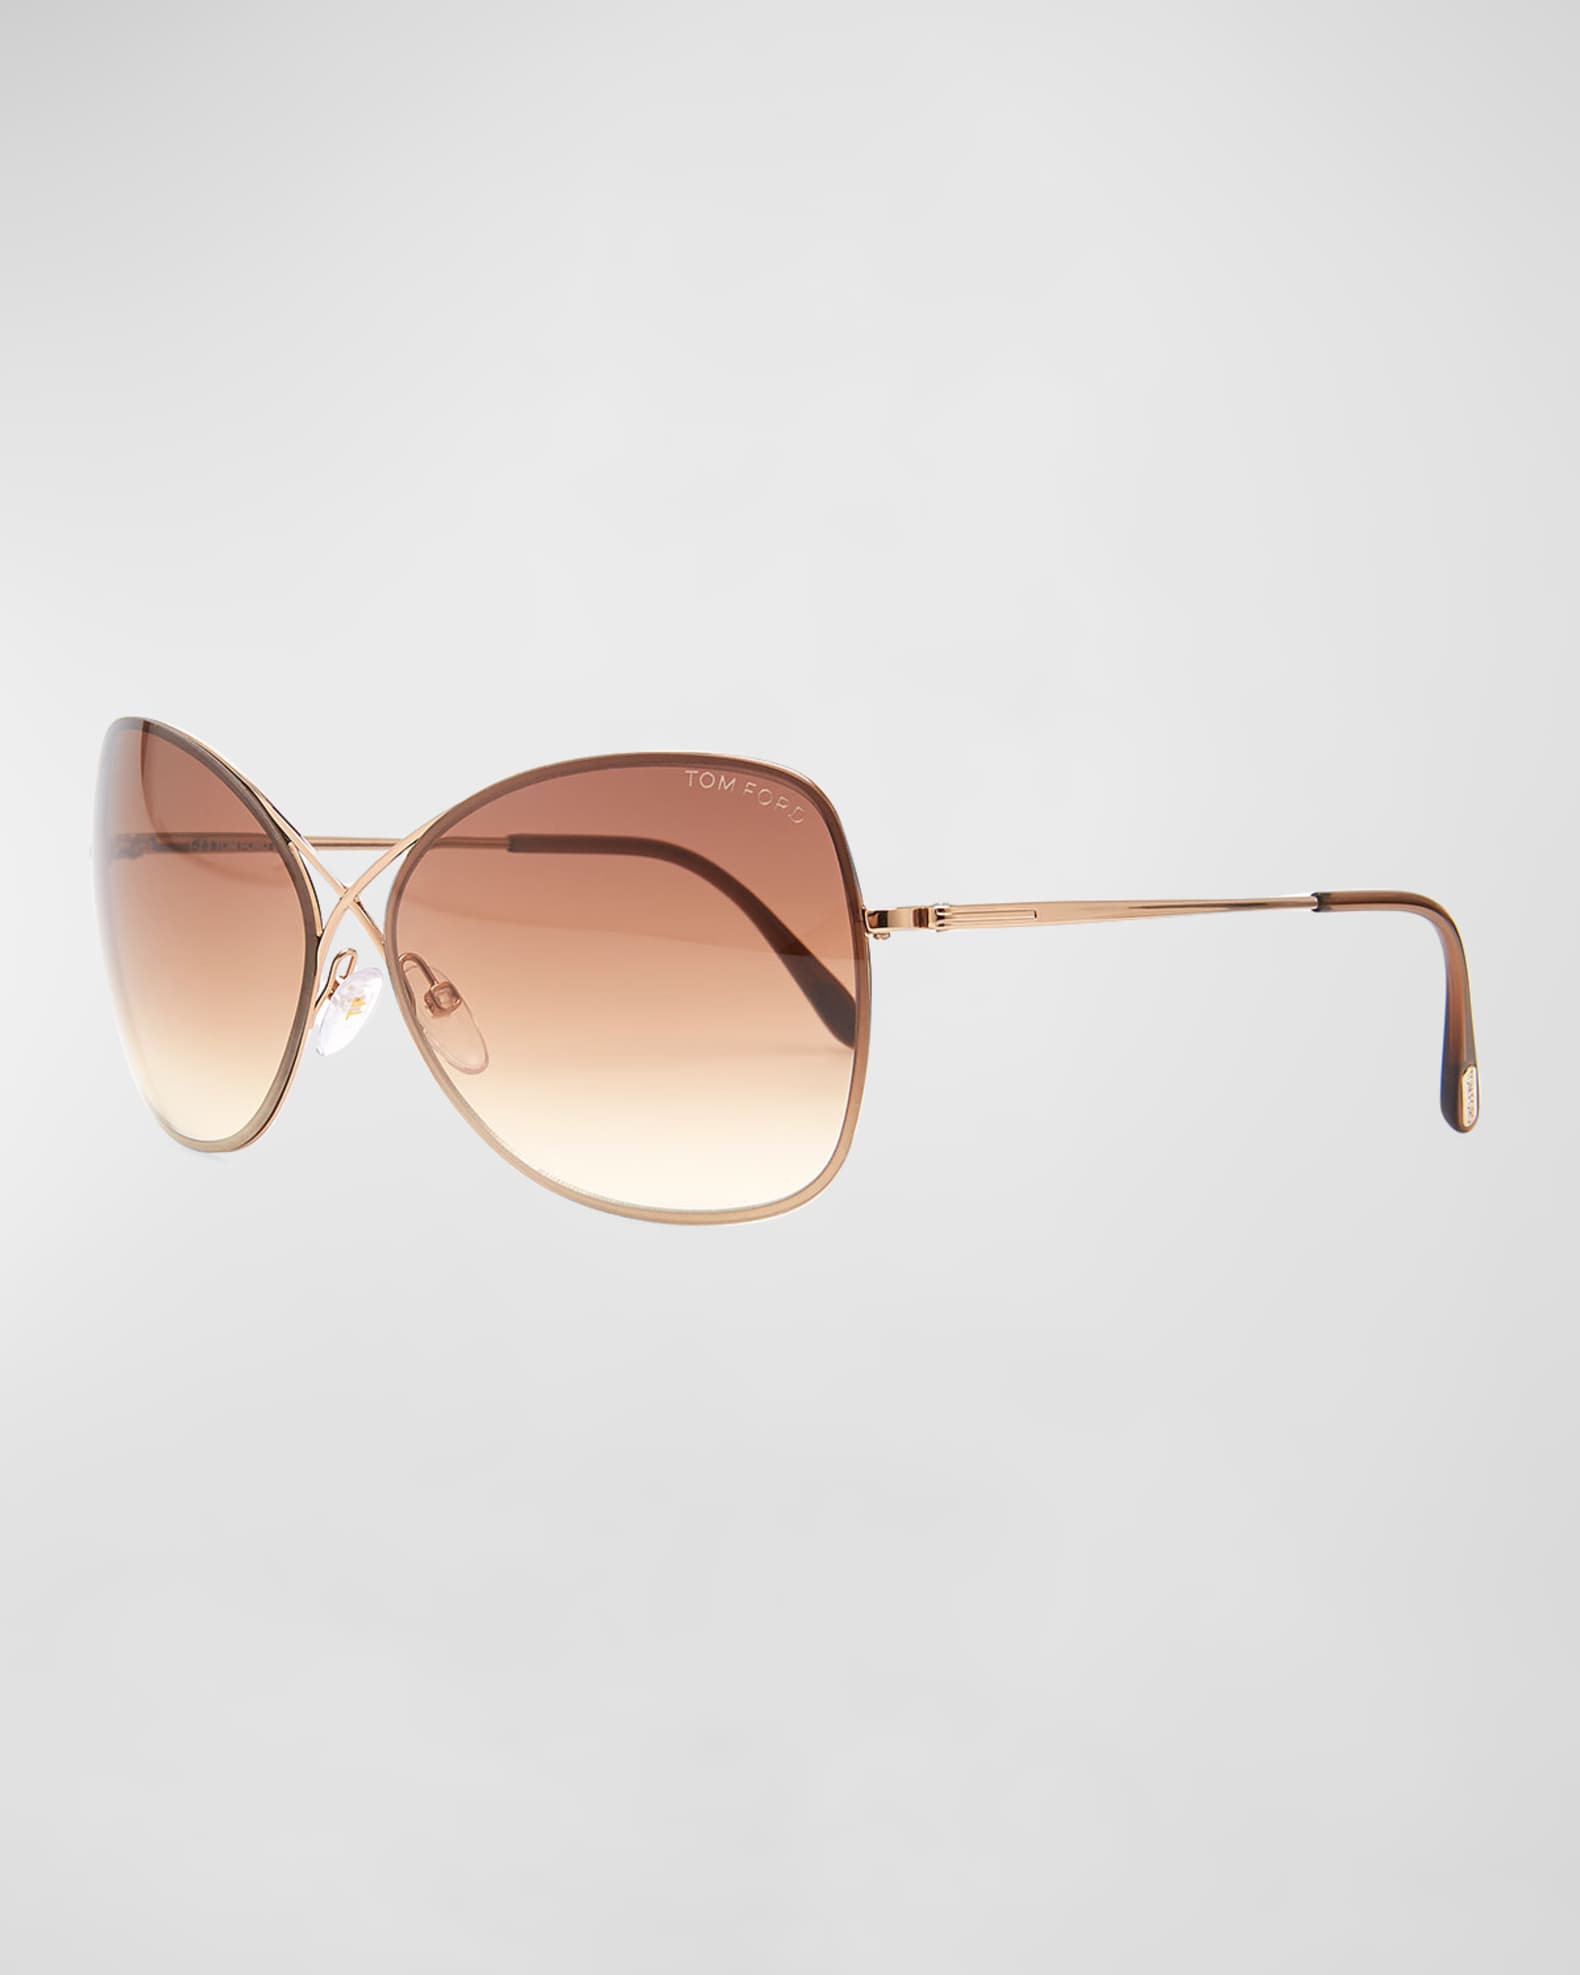 Tom Ford Women's Colette Oversized Sunglasses - Shiny Rose Gold / Brown Gradient